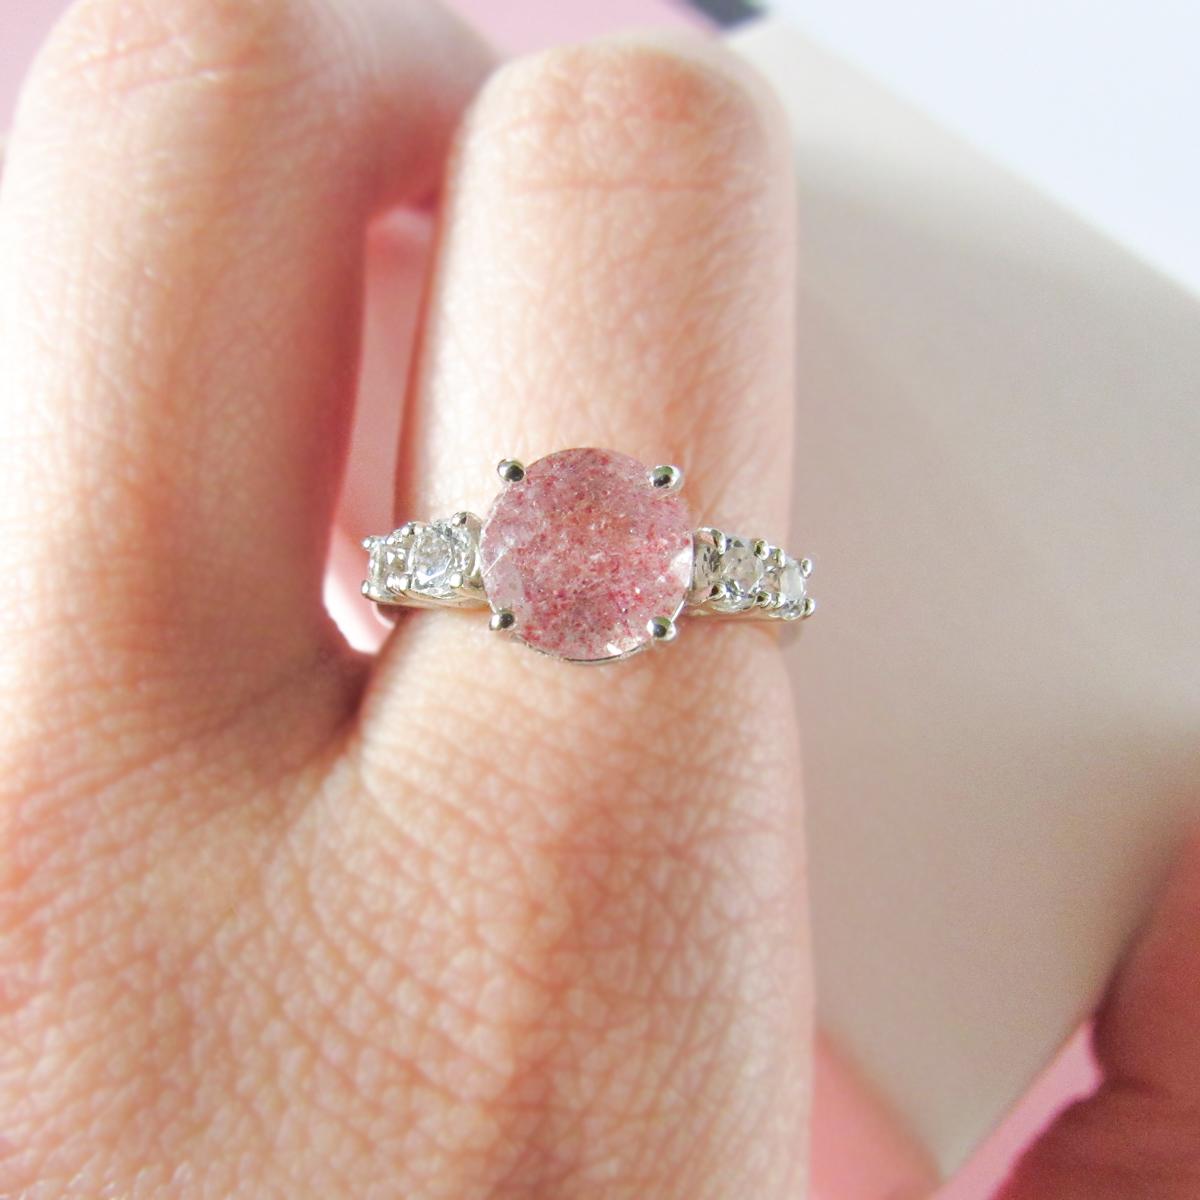 Strawberry Dot Ring

MADE TO ORDER *Please note that we take 30 business days to create your jewel before its ready to ship.  

A 14K white gold ring with a Strawberry Quartz. The Strawberry Quartz is rare and exotic gemstone. It has inclusions of